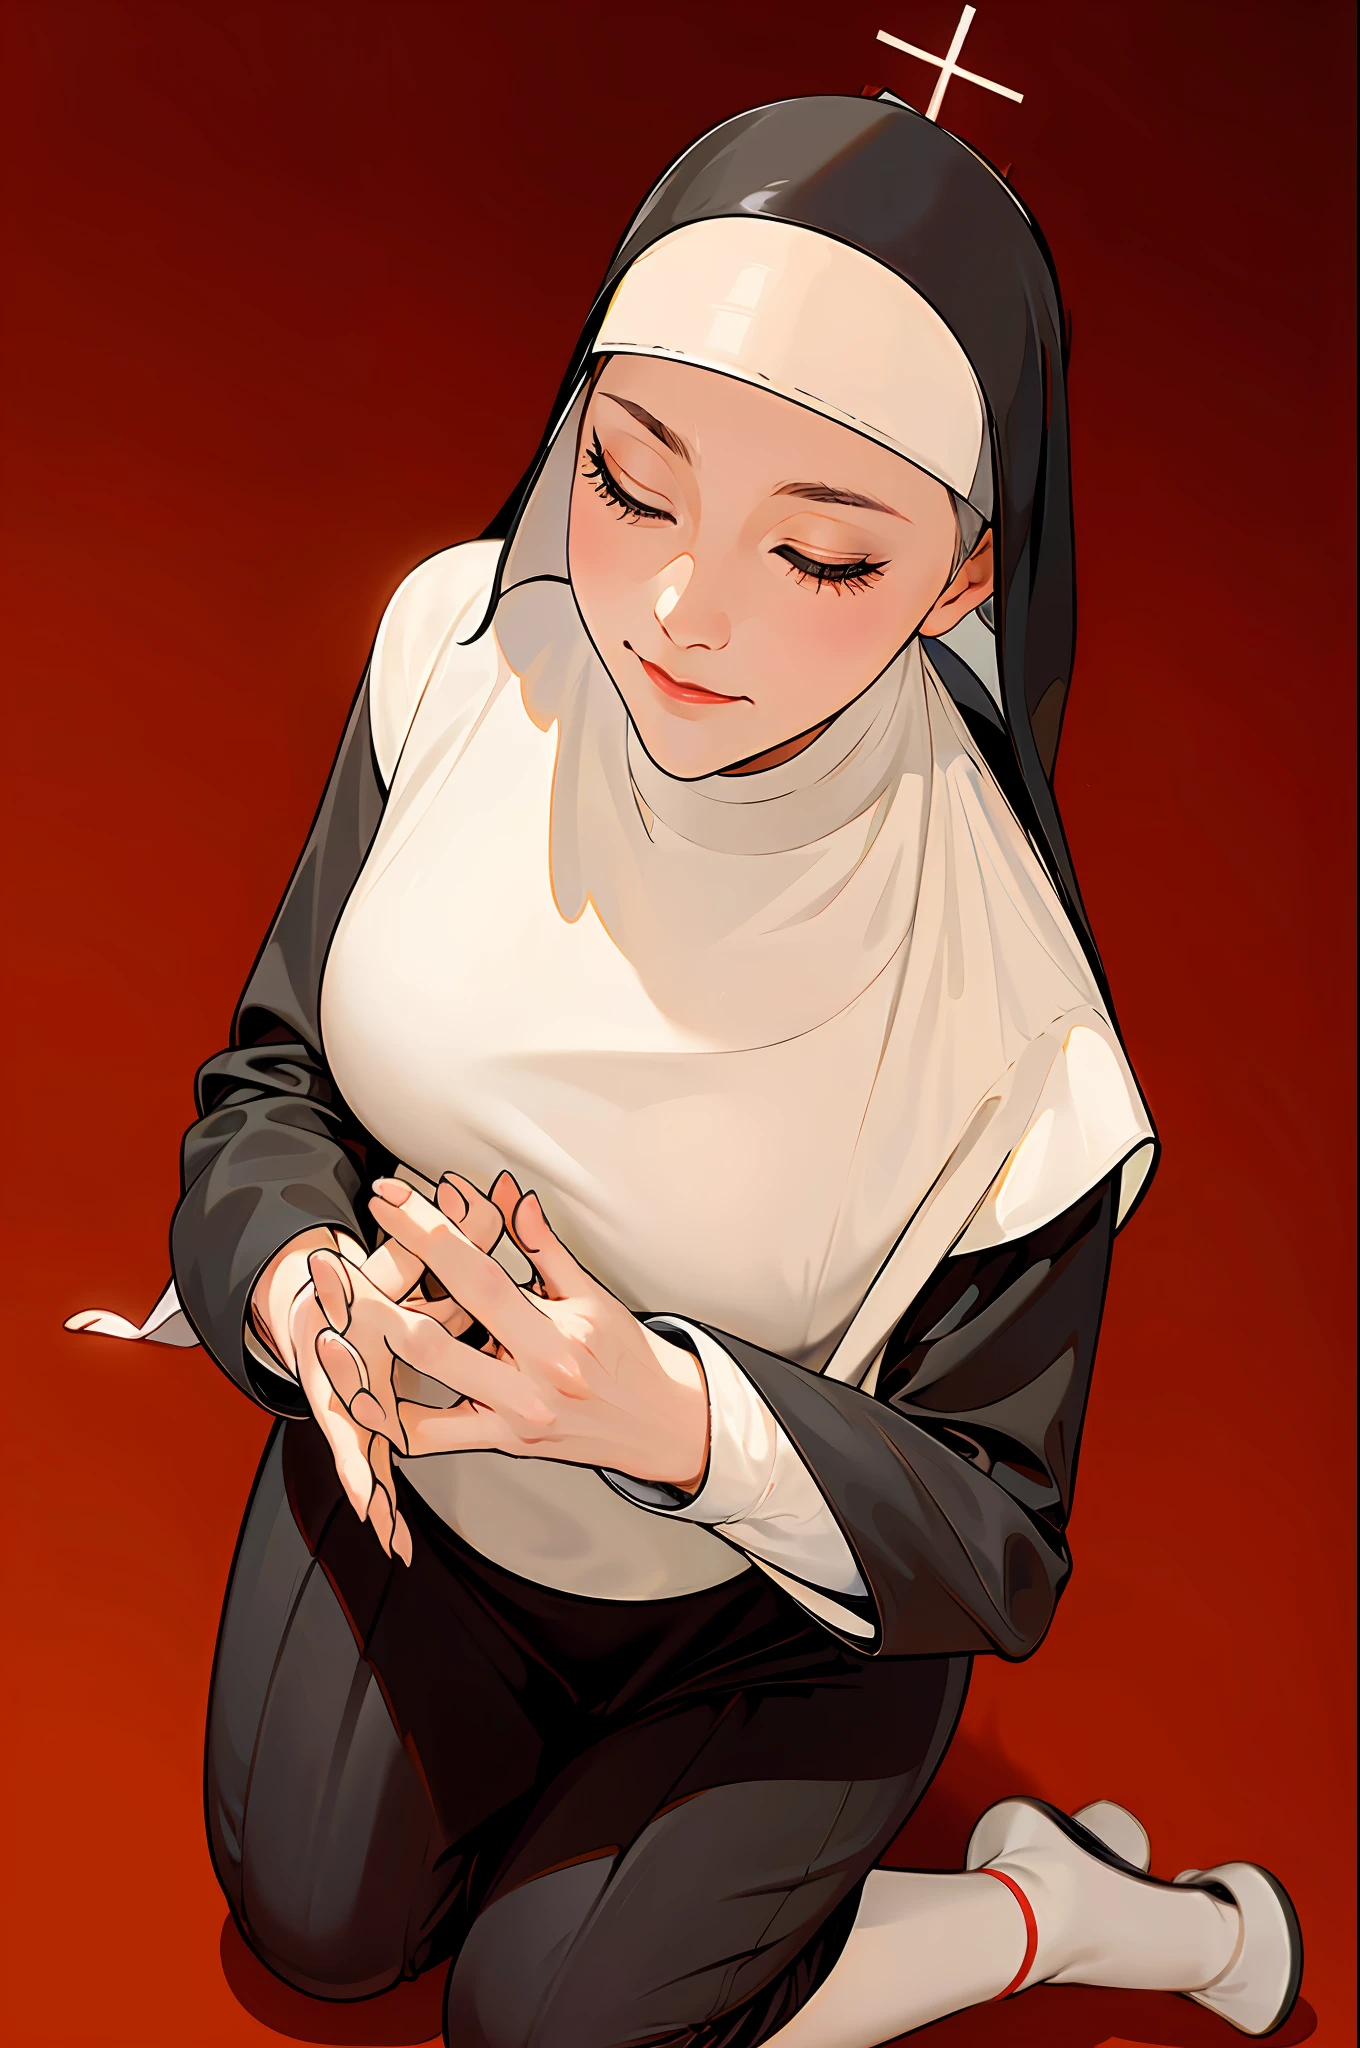 Piel perfecta,((1 girl dressed as a nun)), with her hands in prayer position, full body,(((praying on her knees)))
tight suit, ((pronounced neckline)), large , ((eyes closed)), masterpiece, pretty hands, well-made hands, marked neckline, heavenly light, holding a rosary,